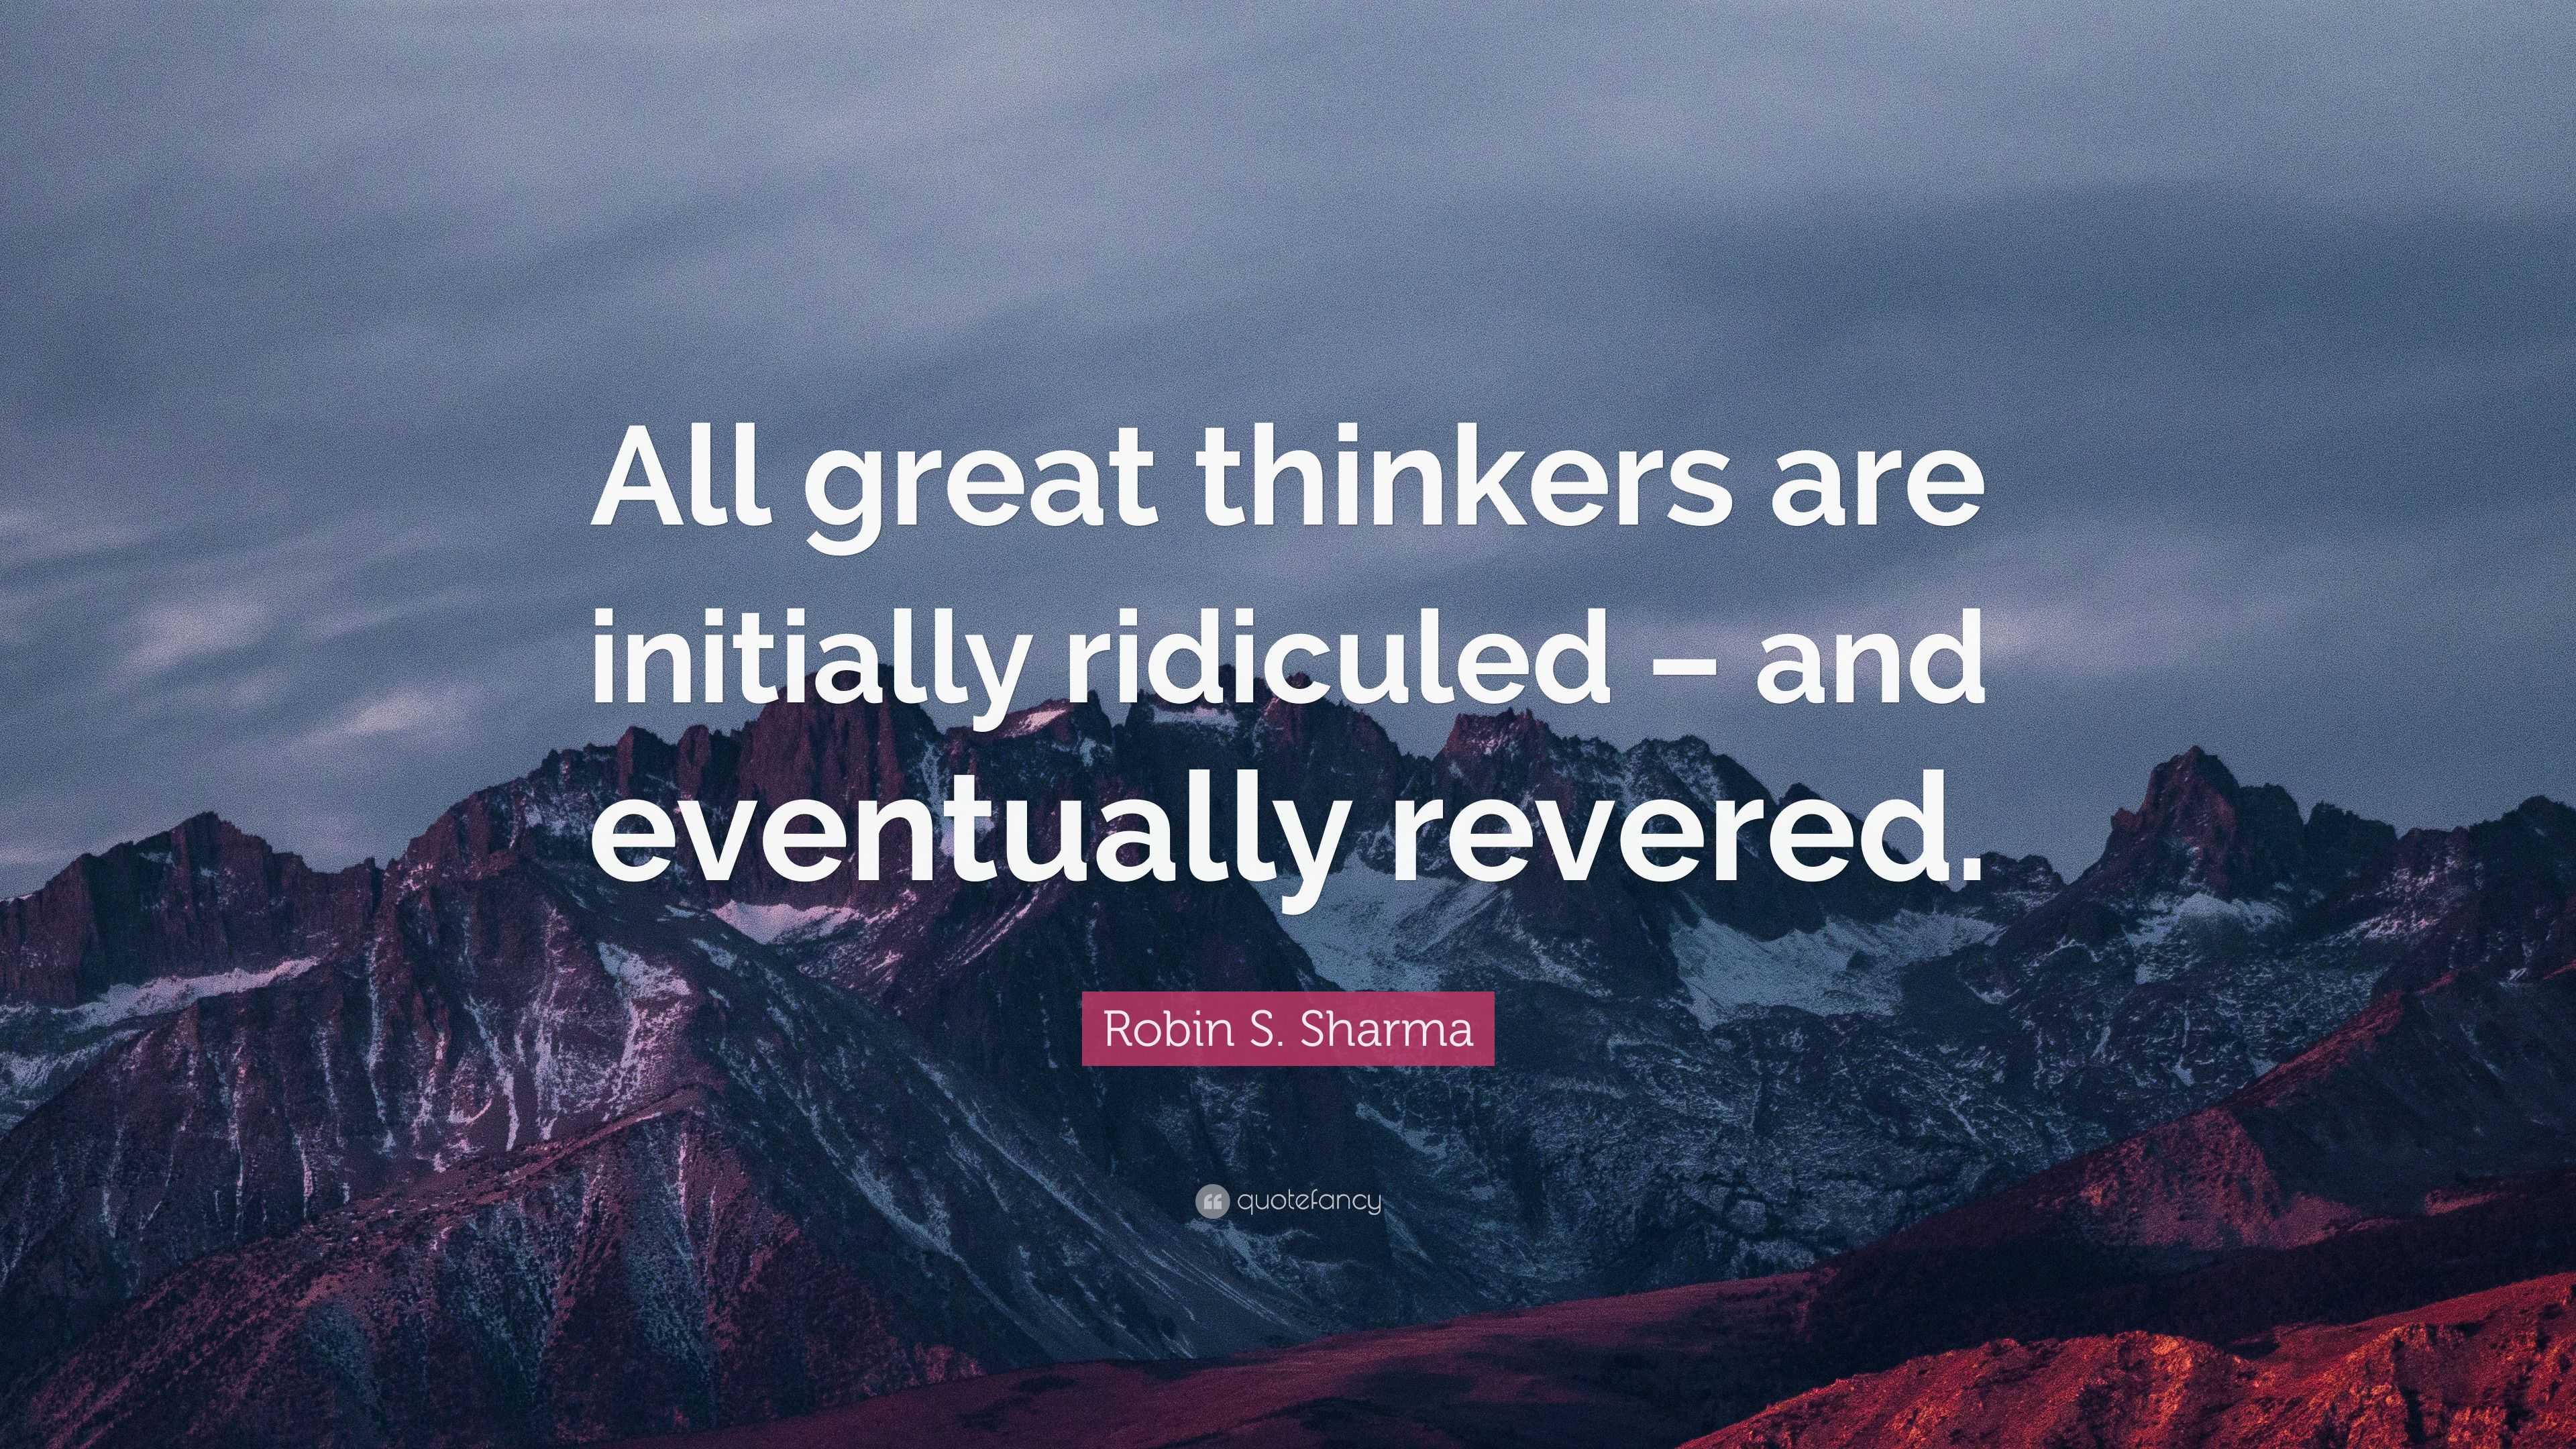 Robin S. Sharma Quote: “All great thinkers are initially ridiculed ...